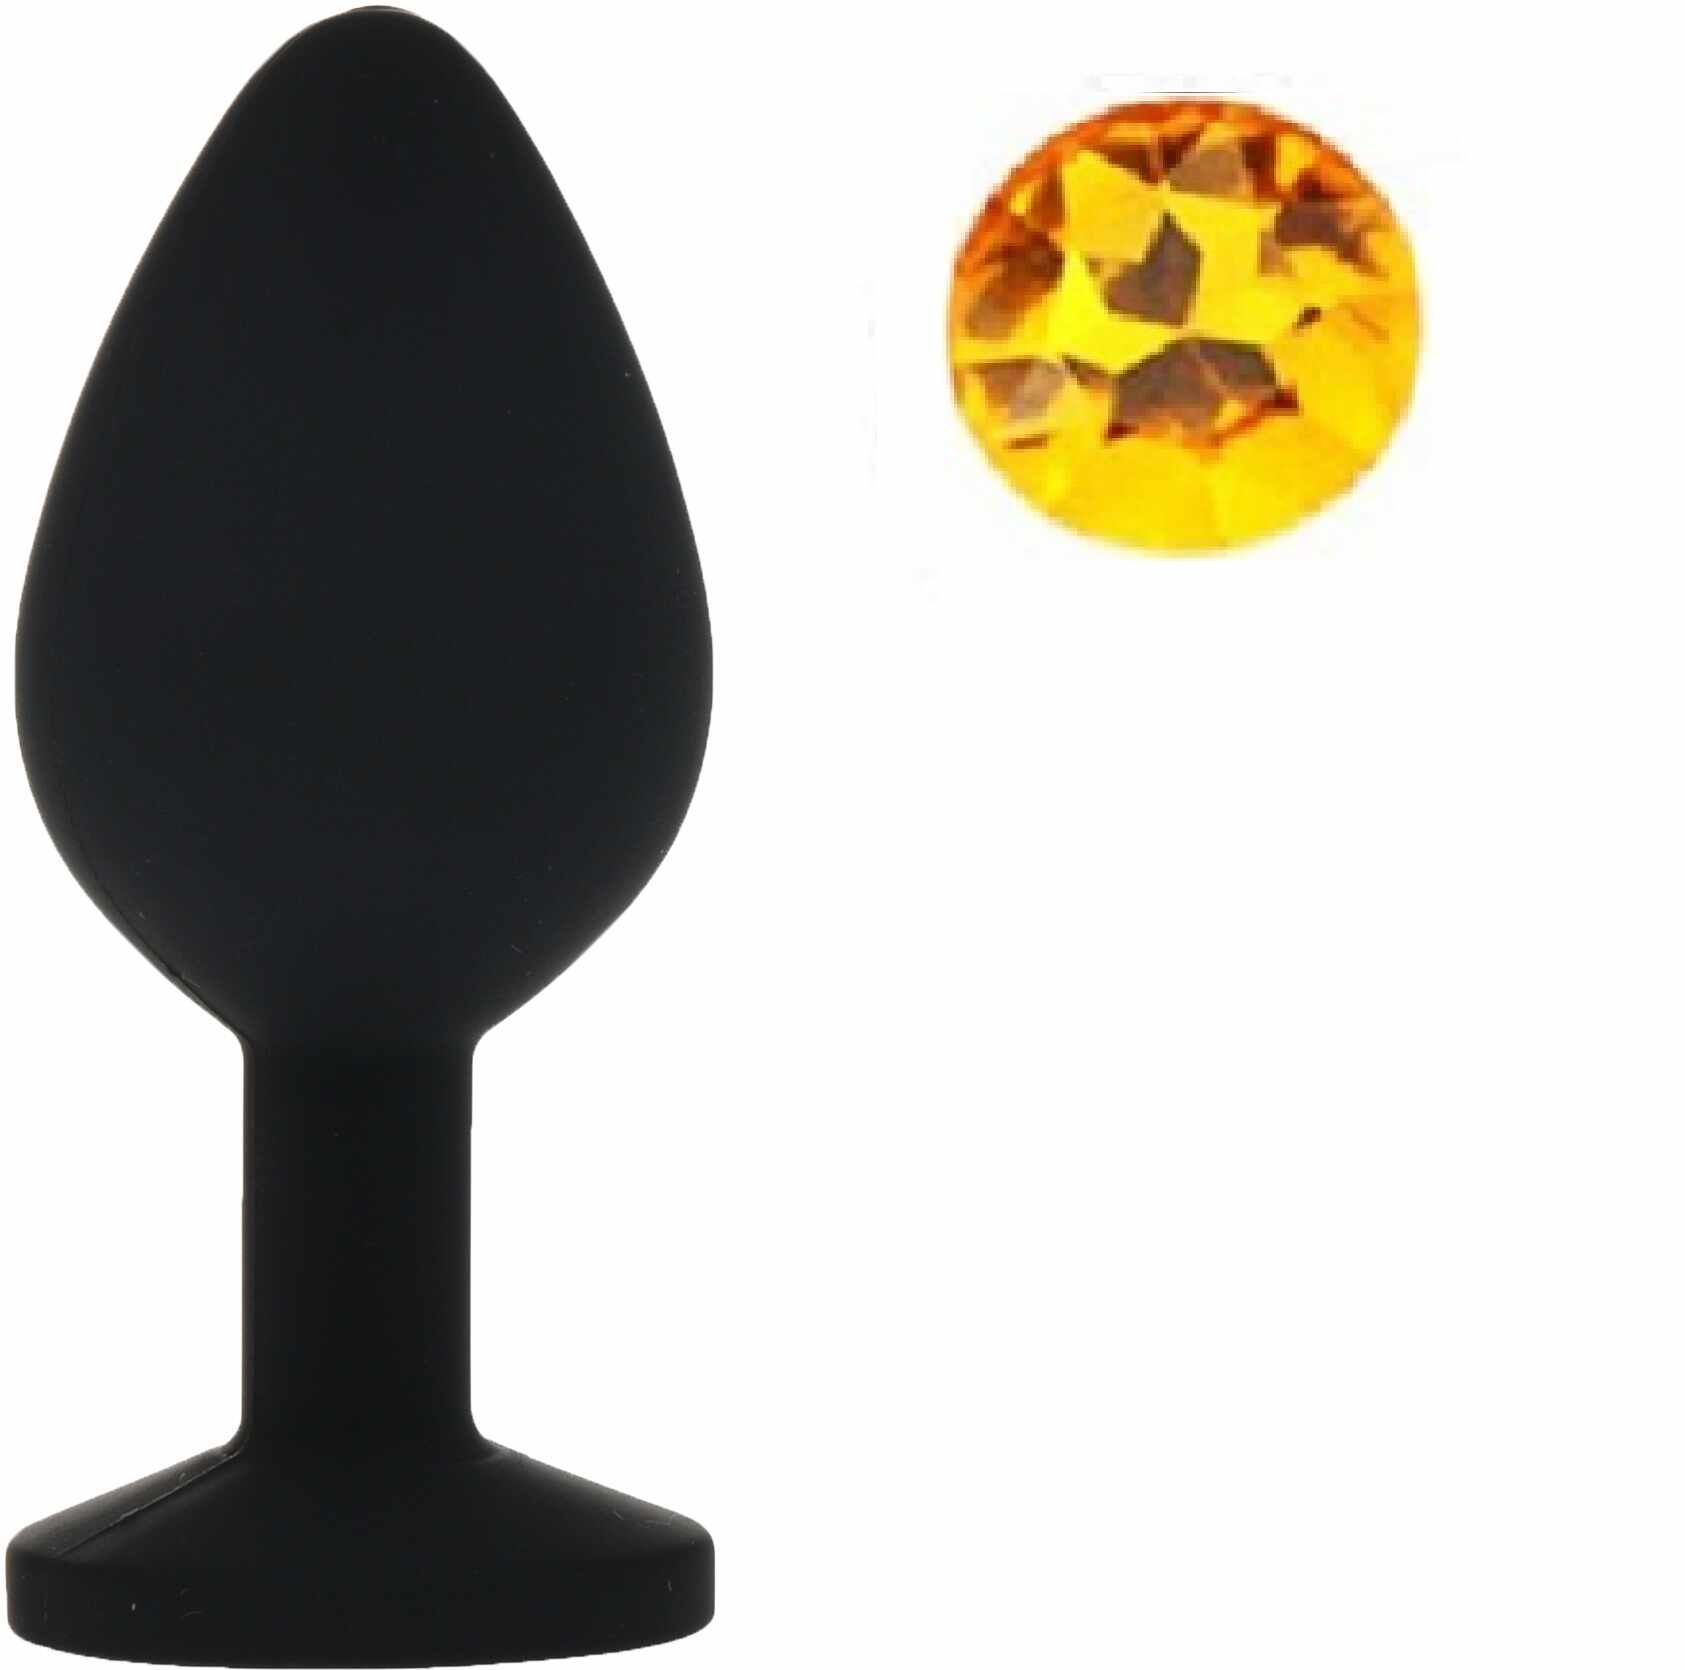 Dop Anal Silicone Buttplug Small Negru/Galben Guilty Toys